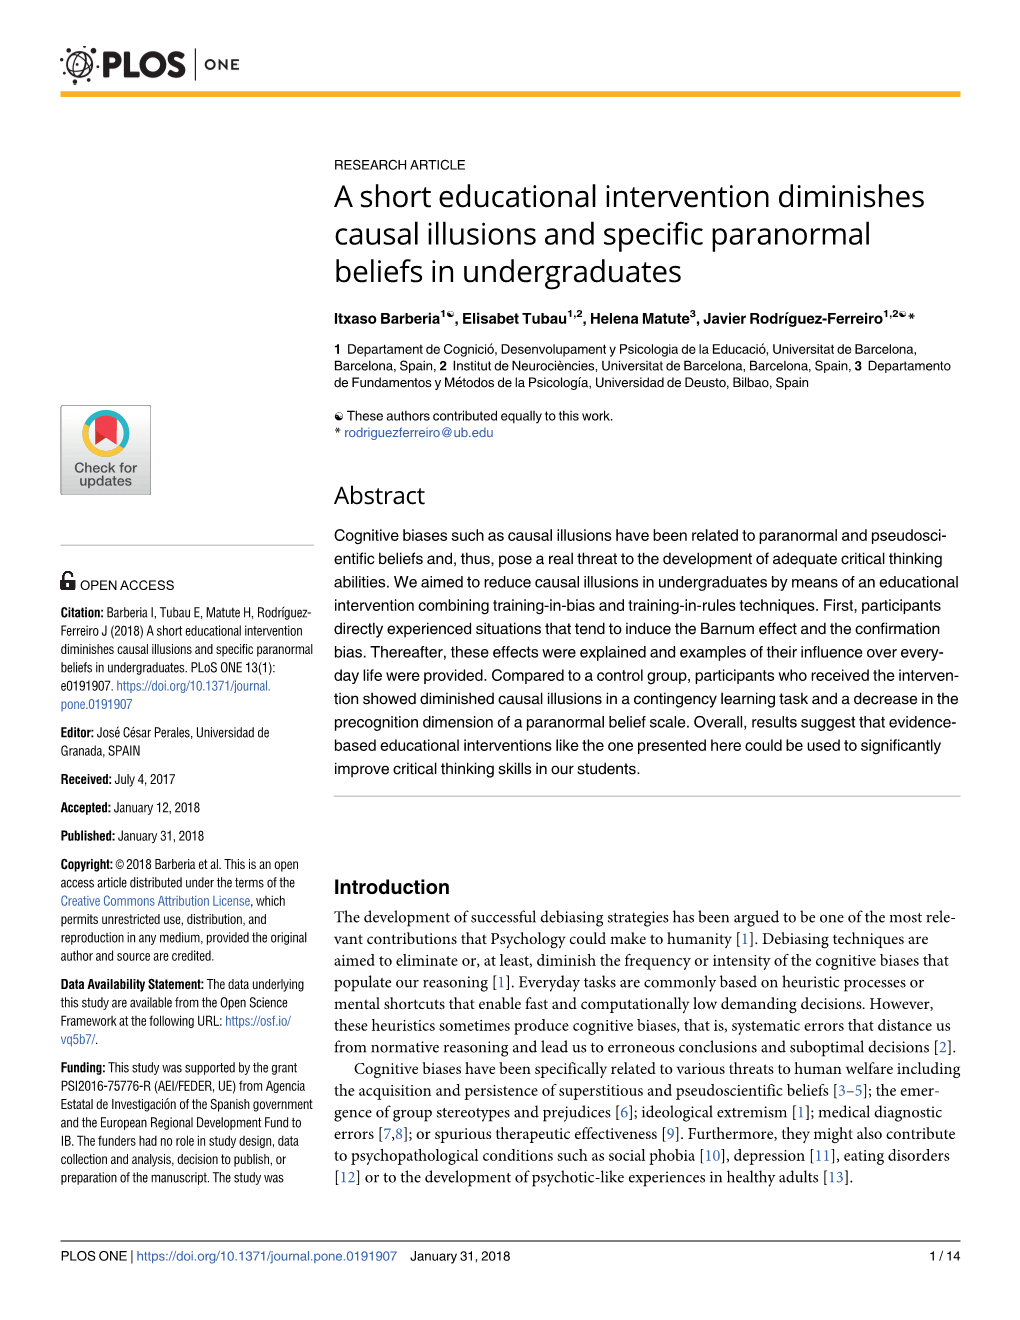 A Short Educational Intervention Diminishes Causal Illusions and Specific Paranormal Beliefs in Undergraduates